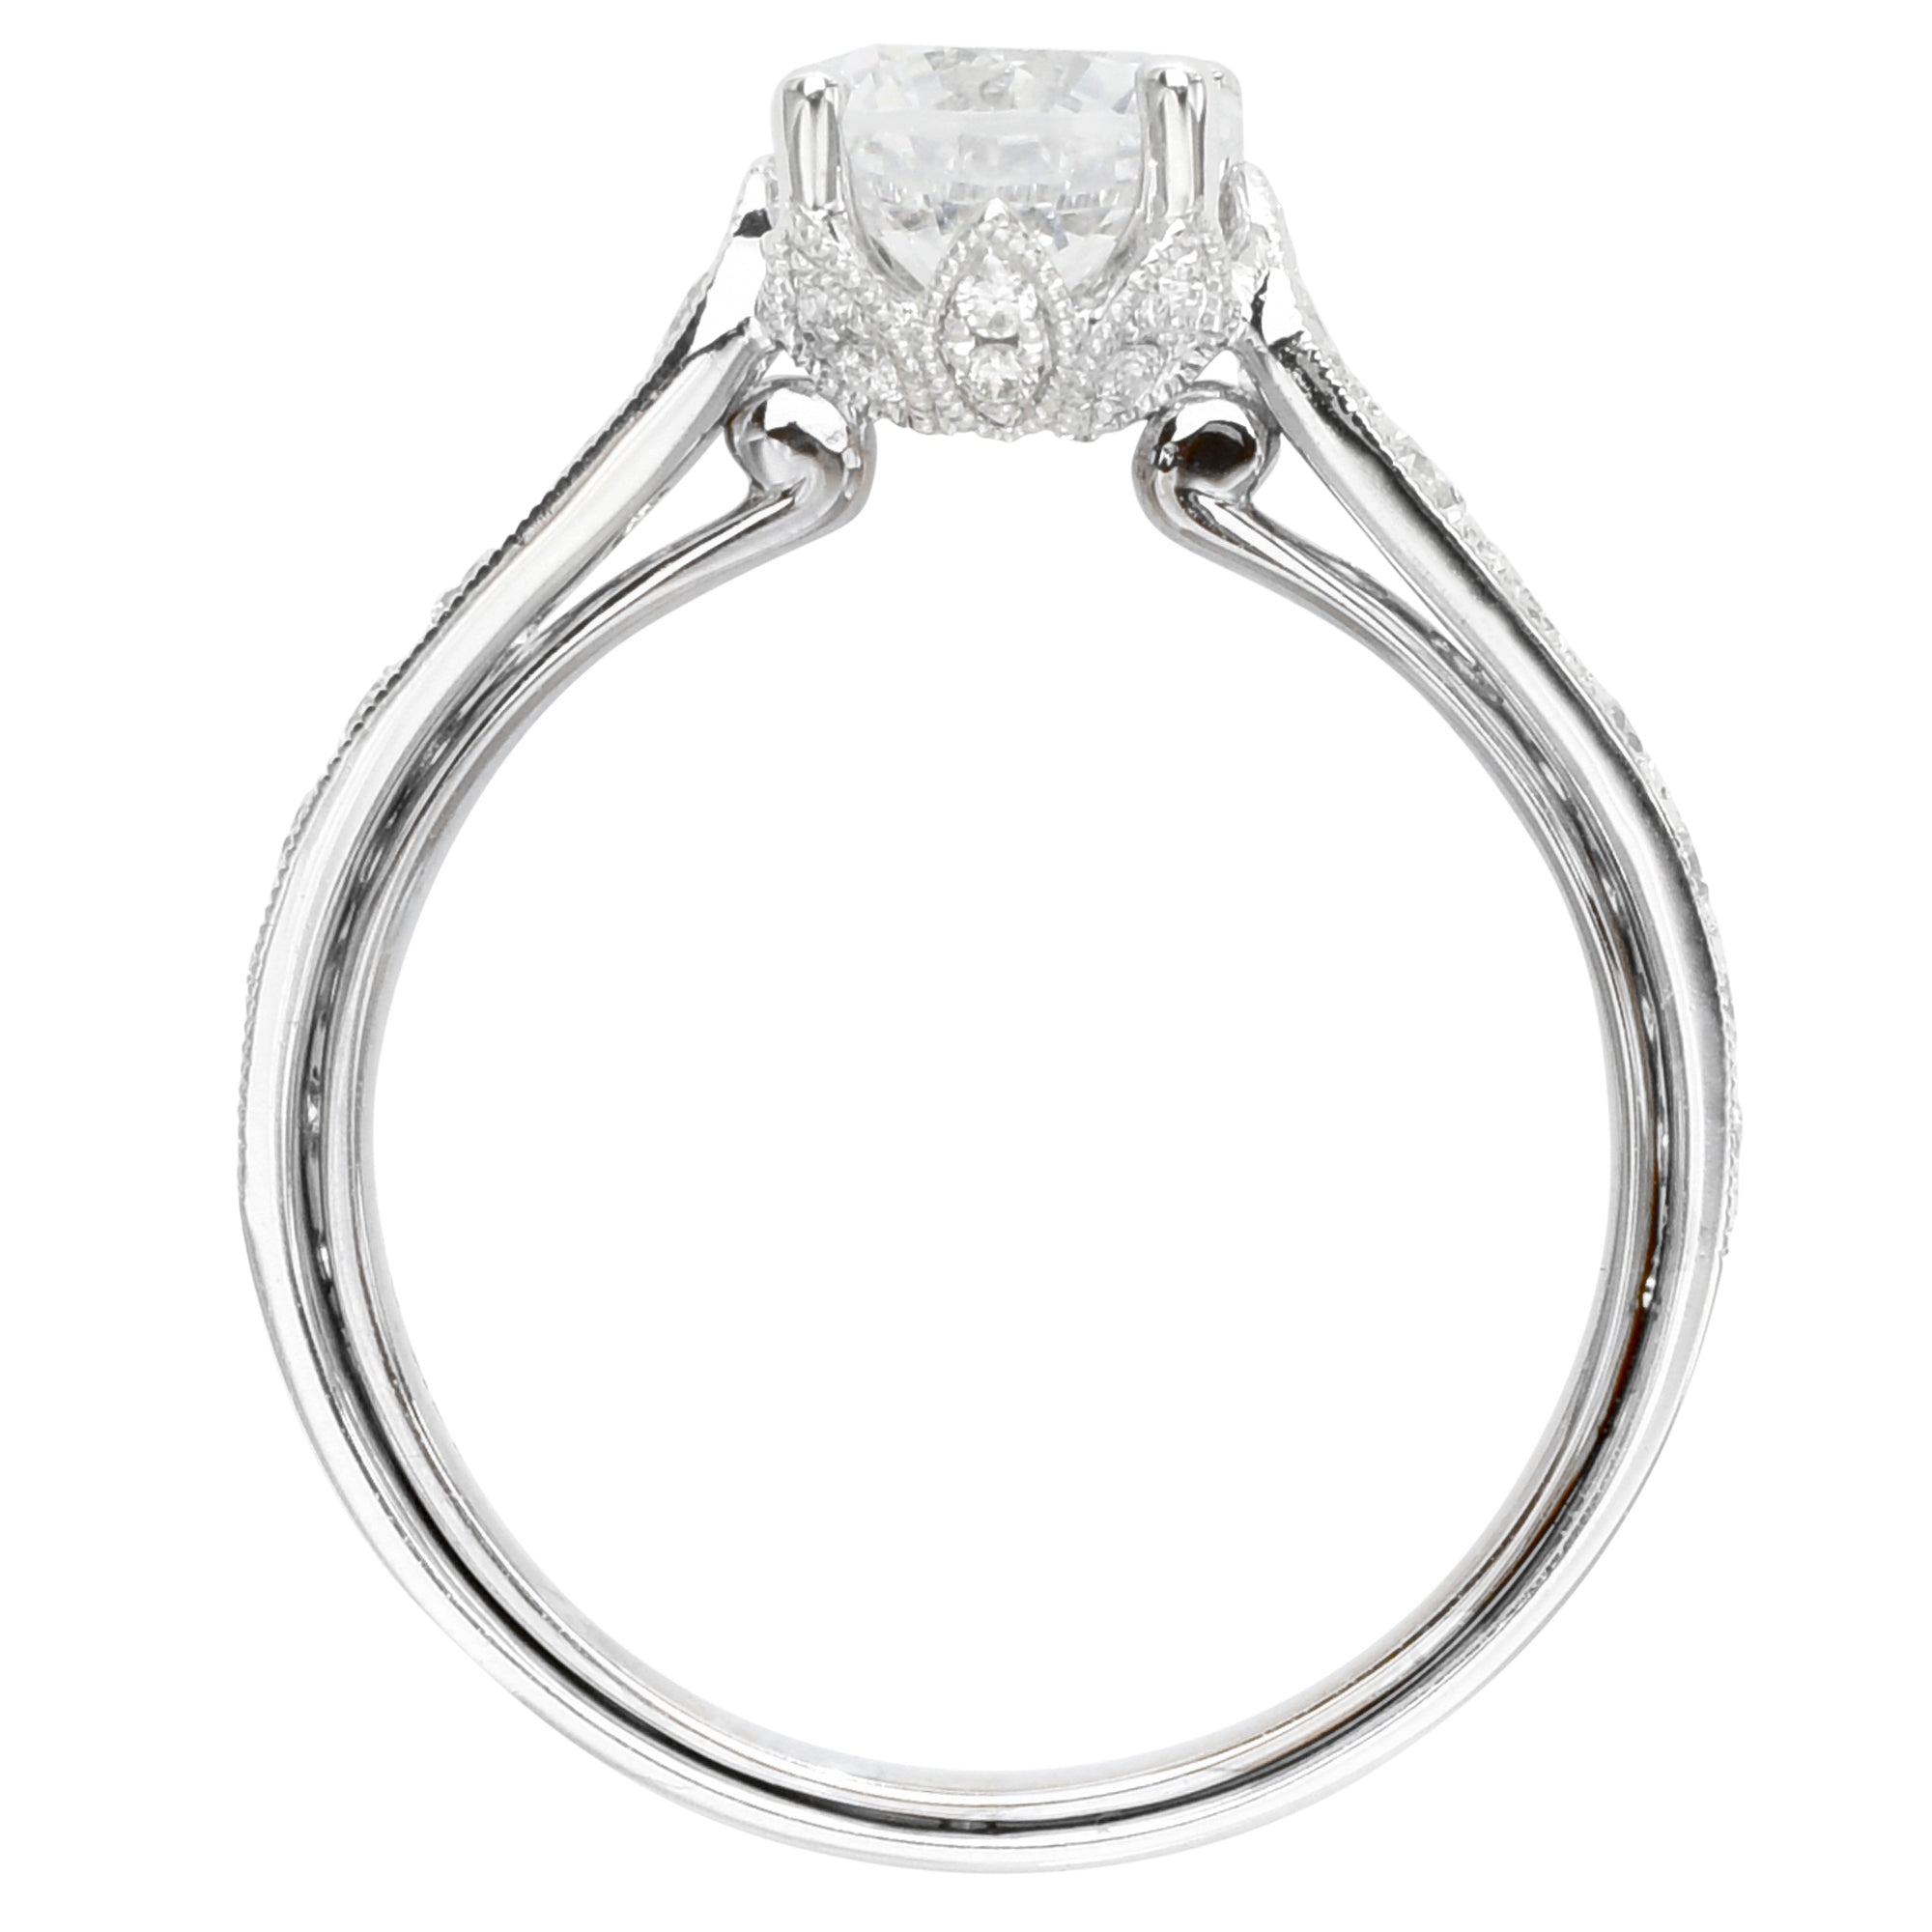 Daydream Diamond Setting in 14kt White Gold (1/2ct tw)